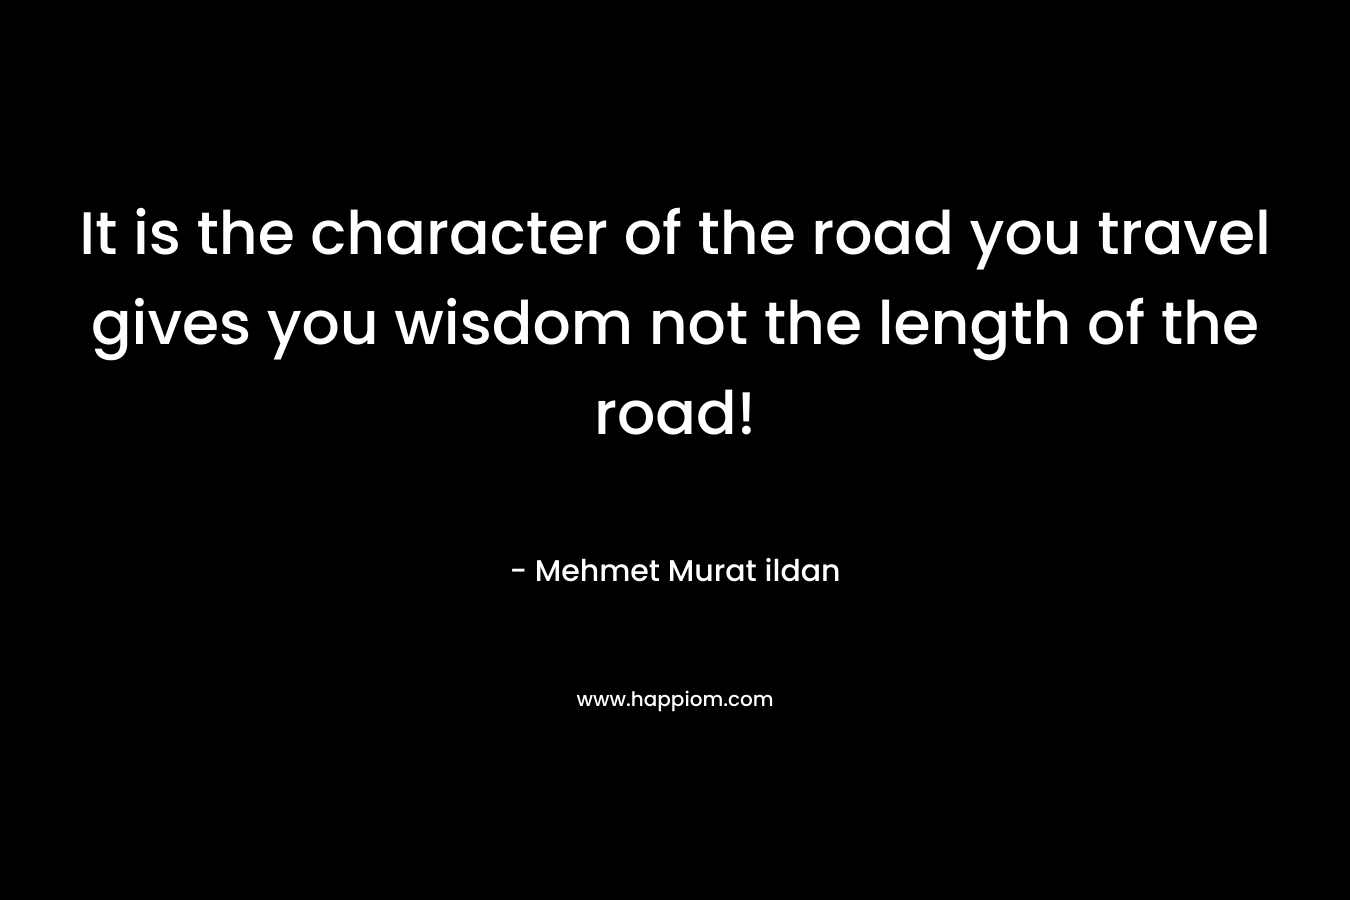 It is the character of the road you travel gives you wisdom not the length of the road!